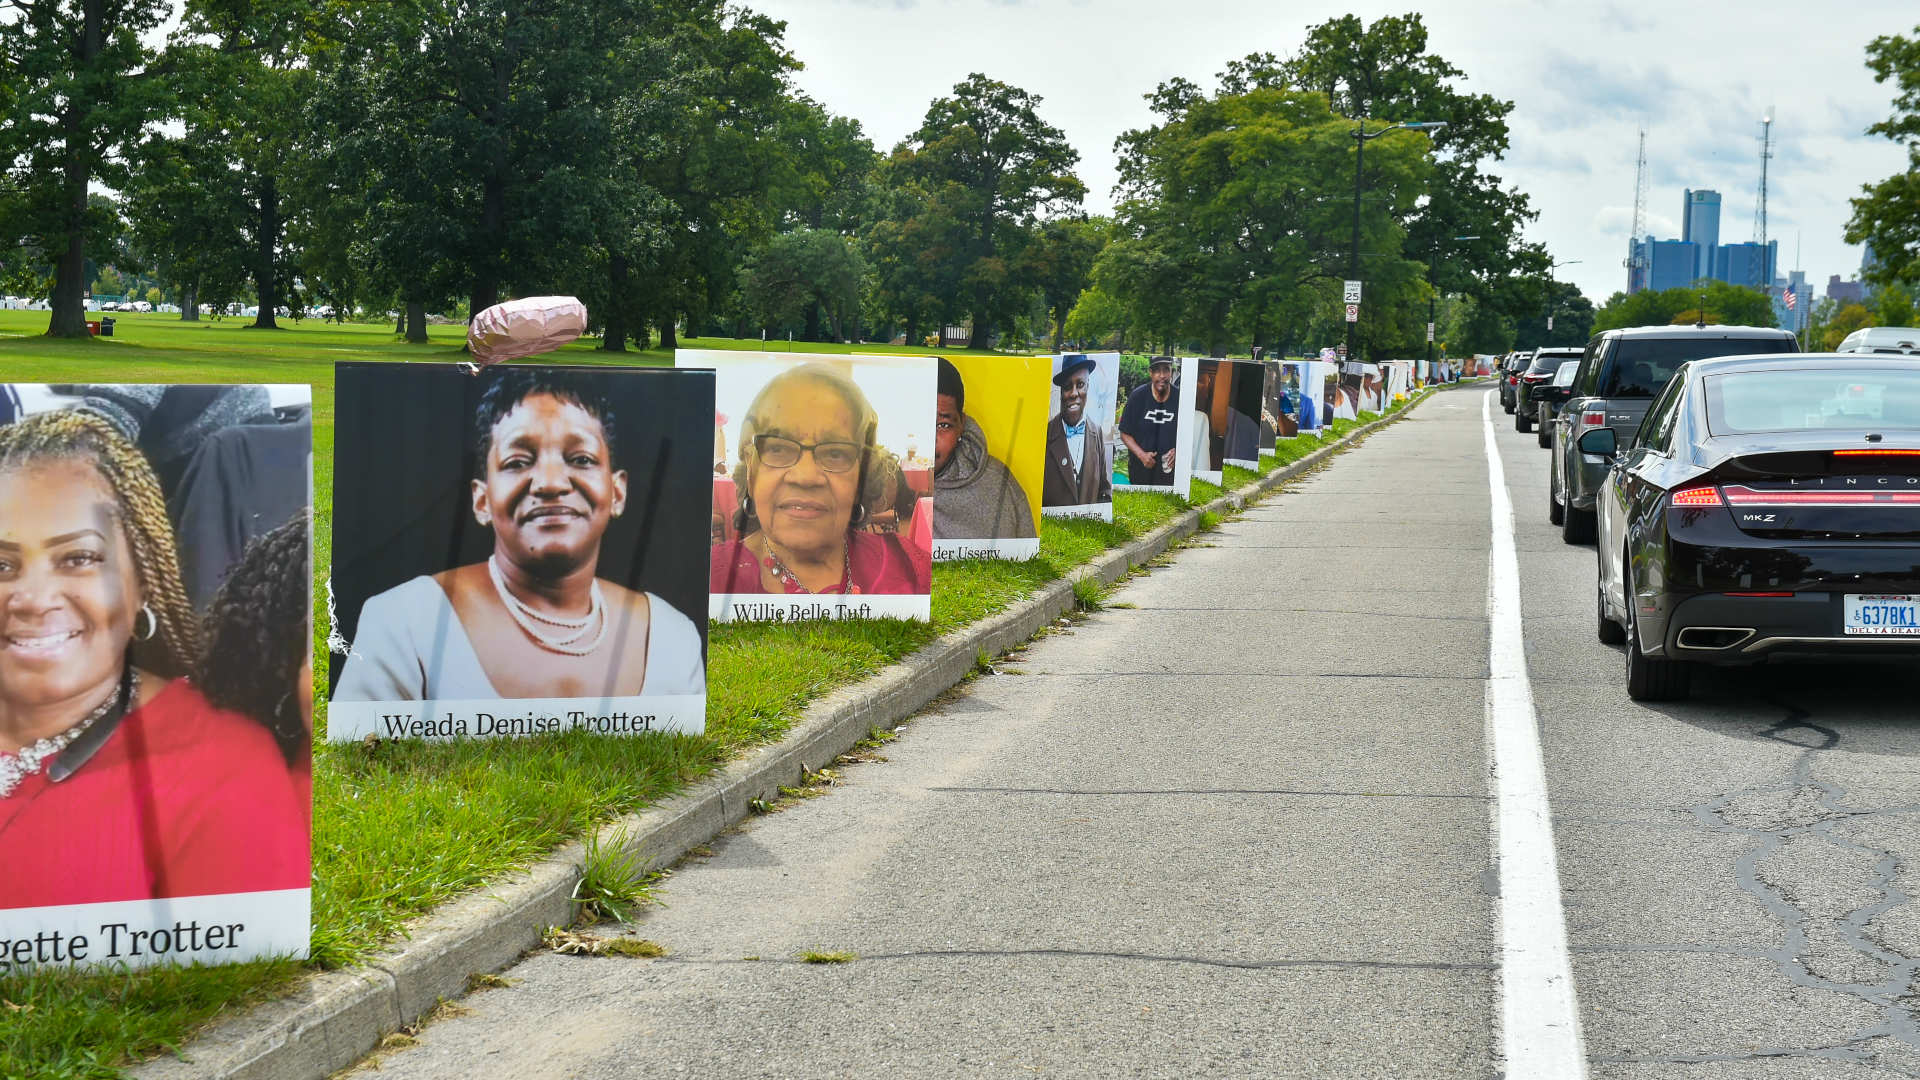 A memorial in Detroit, Michigan honored more than 1,500 victims of Covid-19 on September 2, 2020.